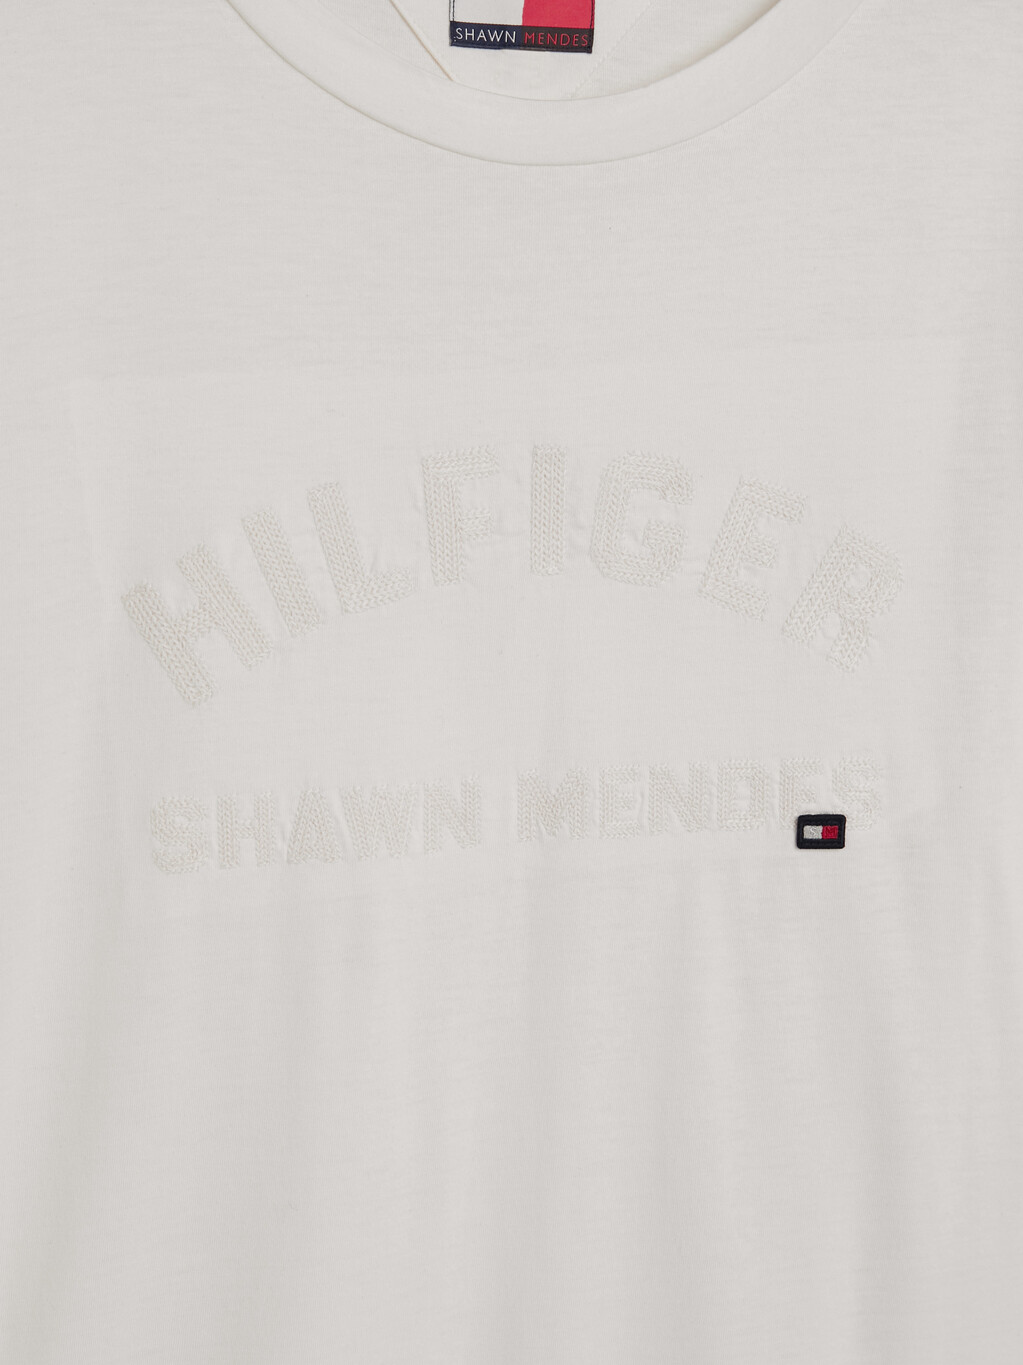 Tommy Hilfiger X Shawn Mendes Archive T-Shirt, Weathered White, hi-res